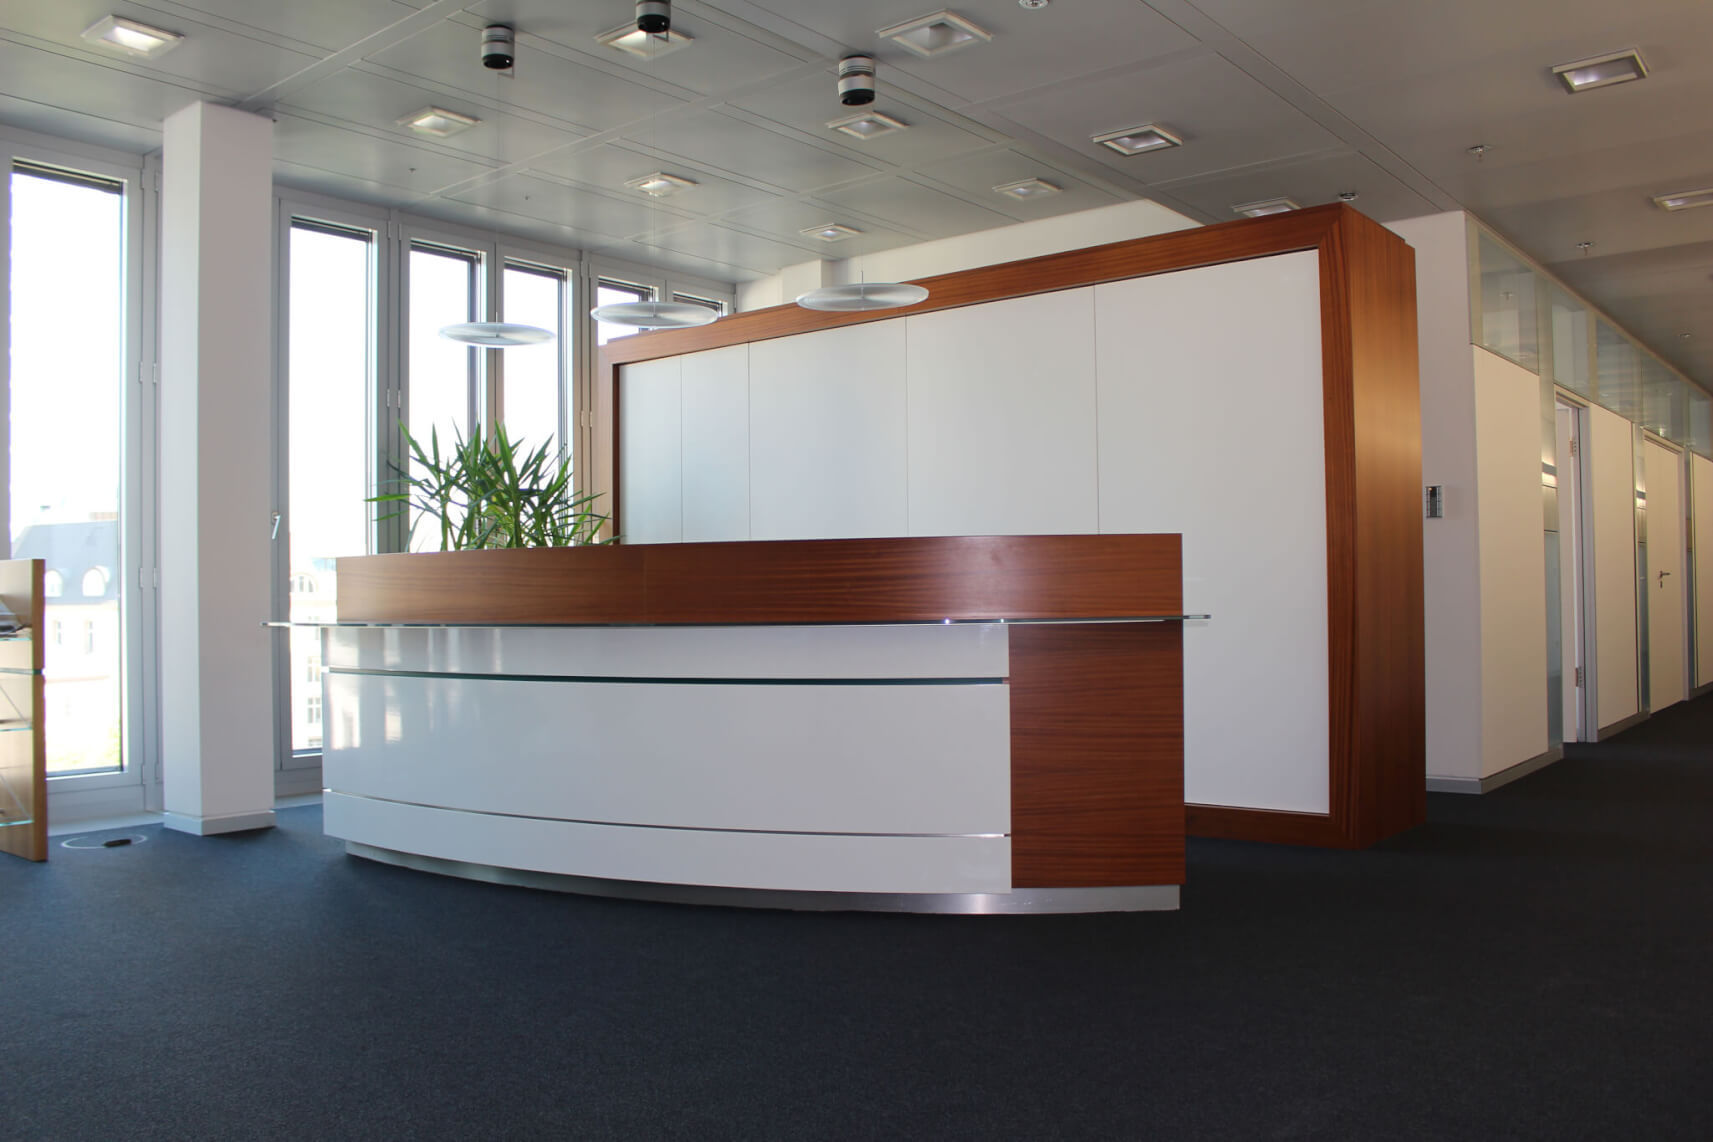 Office partition walls of a wooden desk in white, coated with self-adhesive film - after